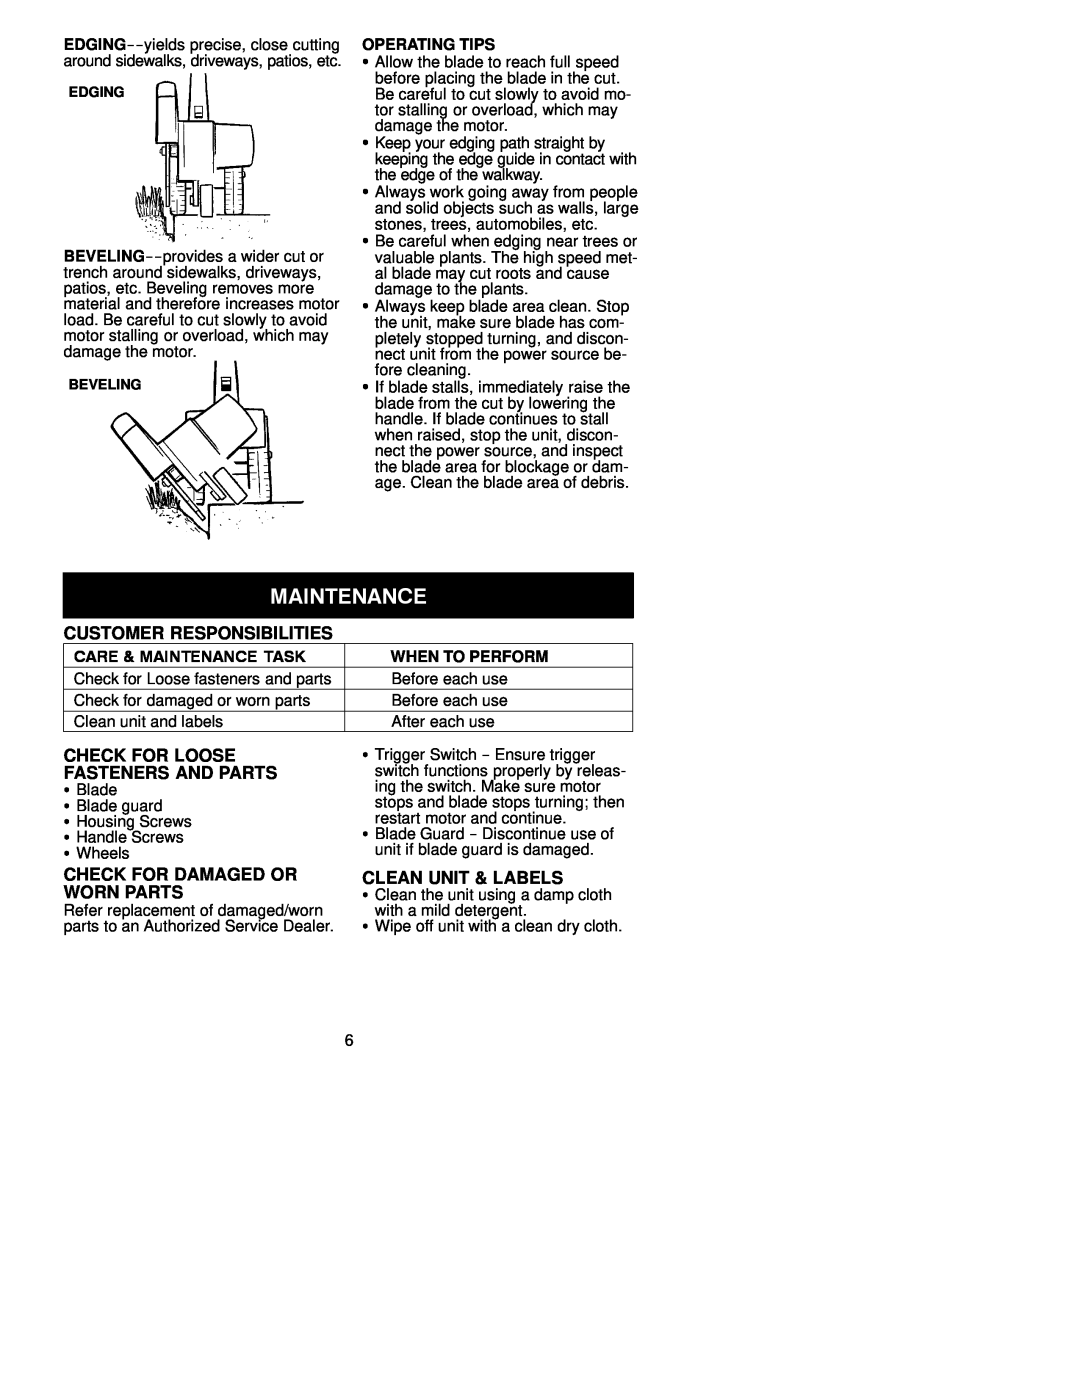 Weed Eater PE225 manual Customer Responsibilities, Check For Loose, Fasteners And Parts, Check For Damaged Or Worn Parts 